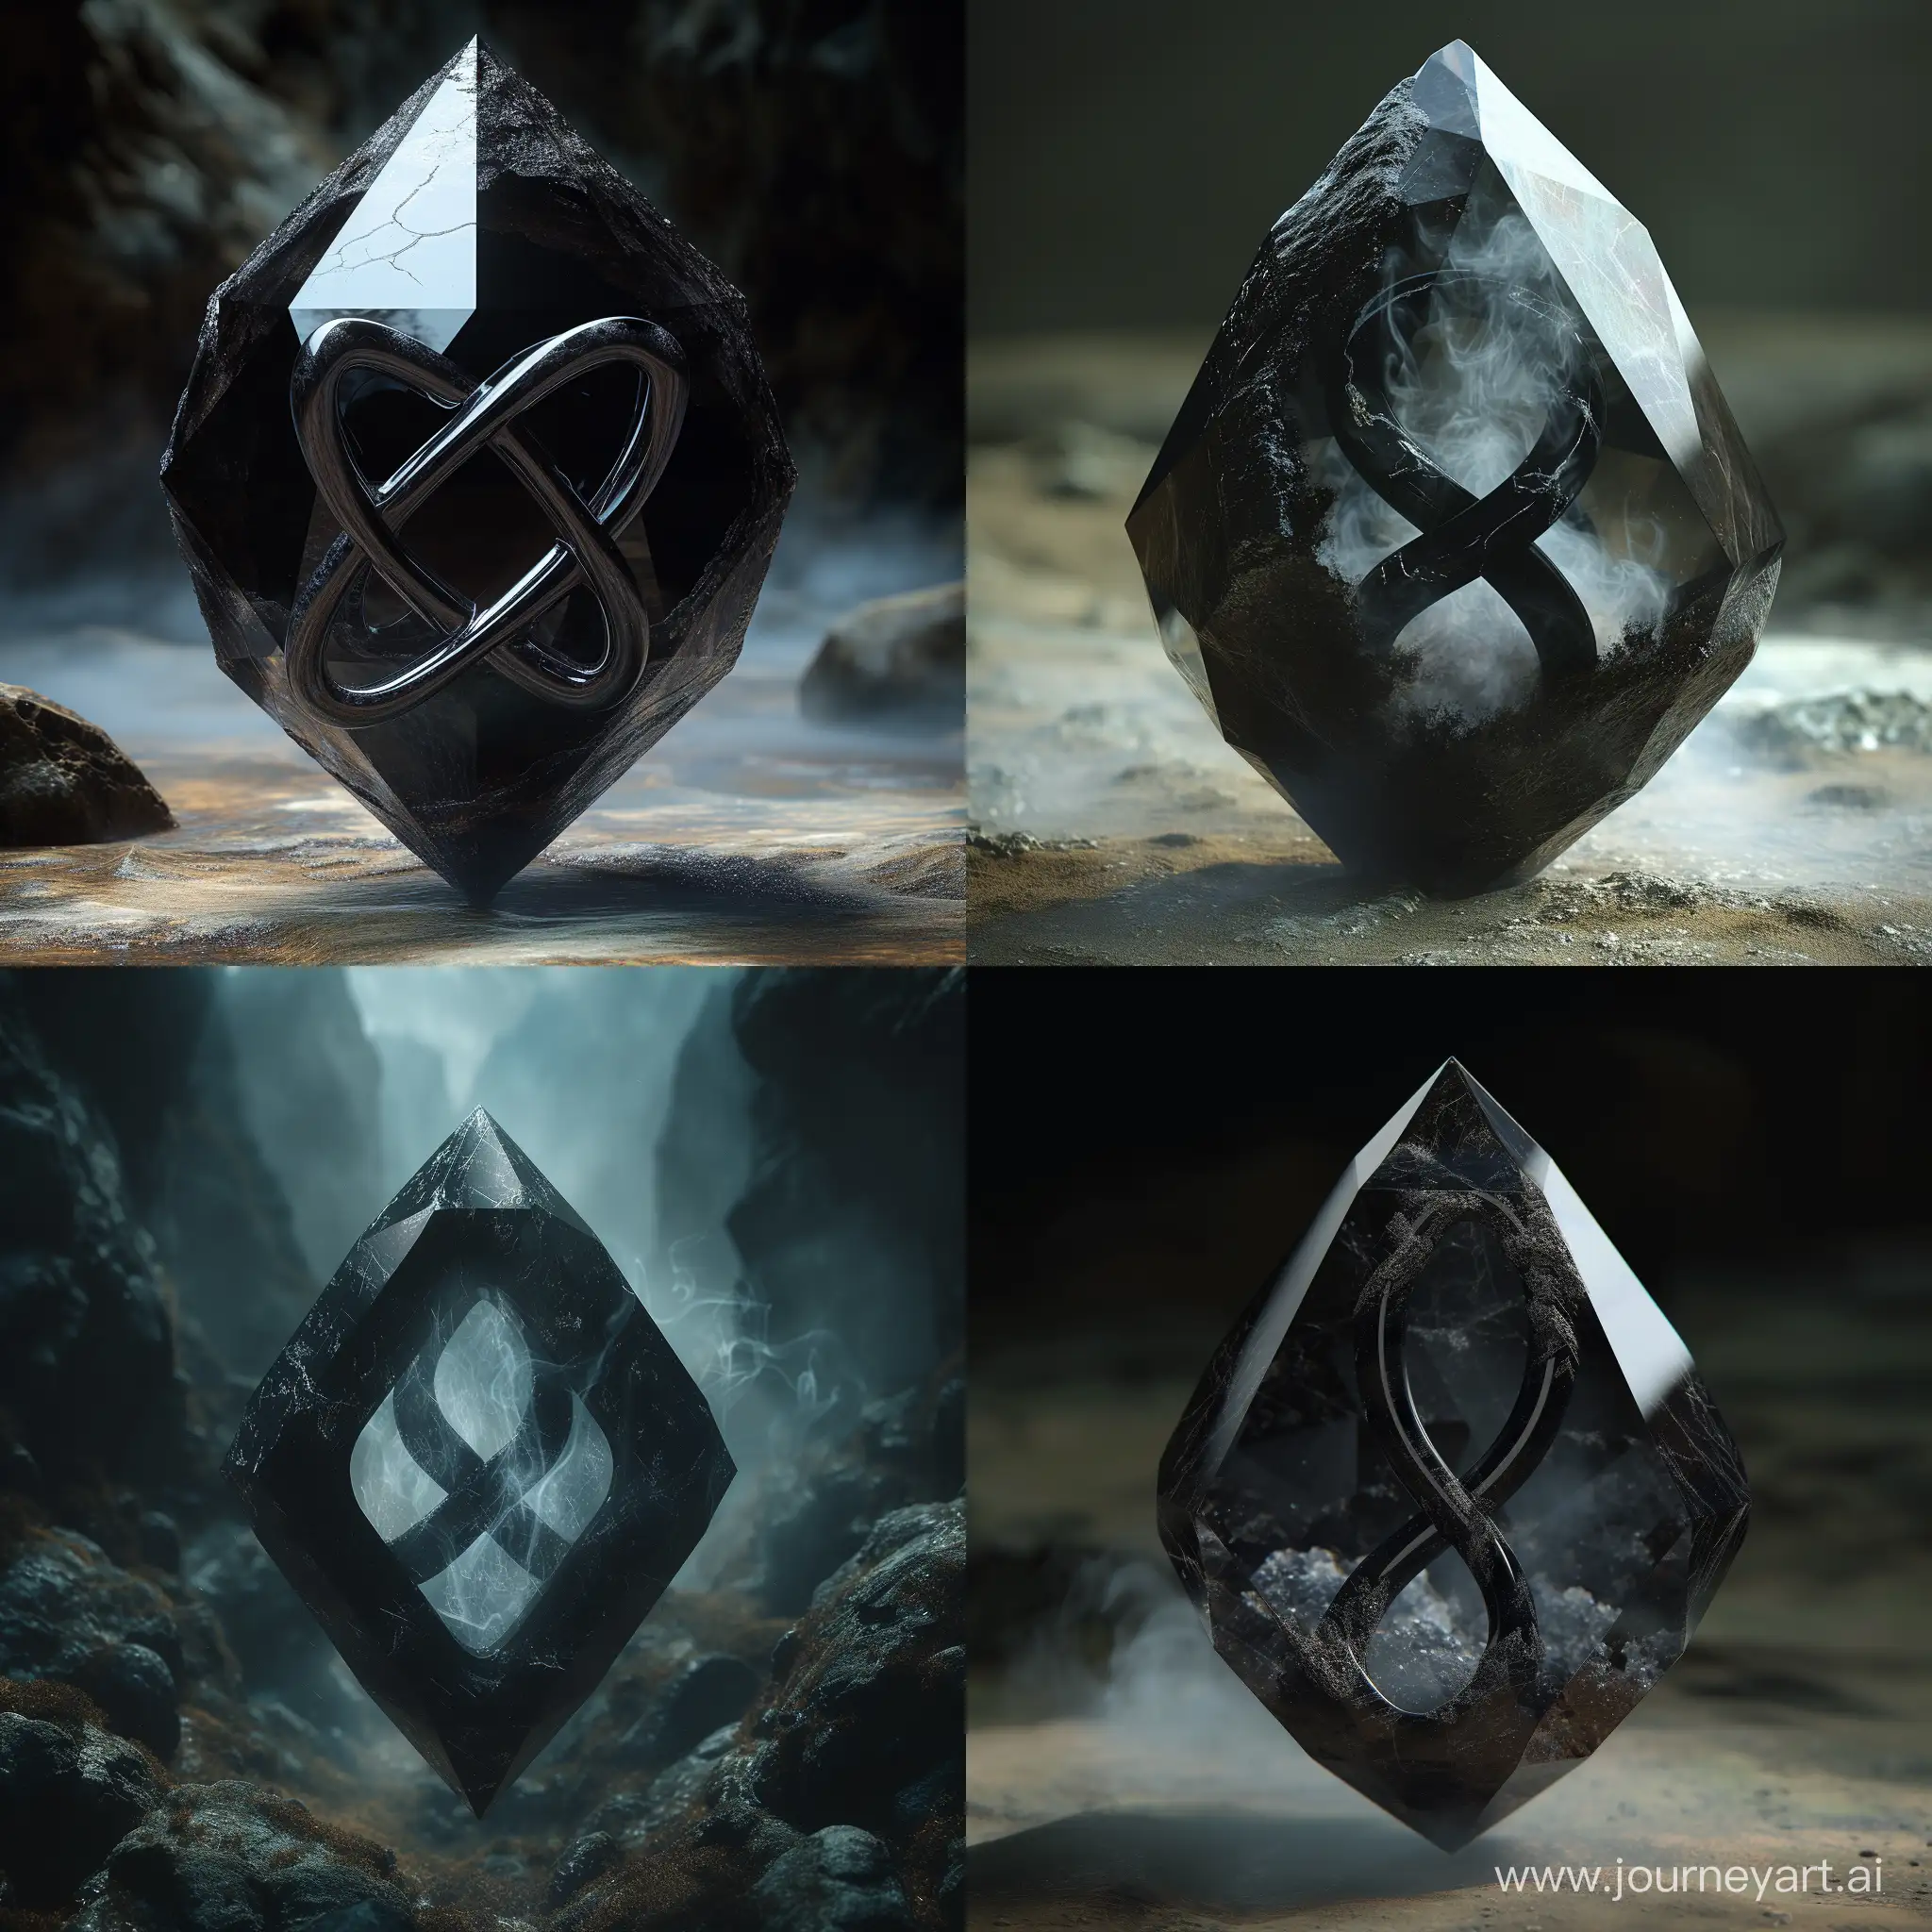 translucent black diamond-shaped crystal inside with a dark haze in the shape of an infinity sign called essence, cave, lotr, realistic, fantasy, 4k, hd